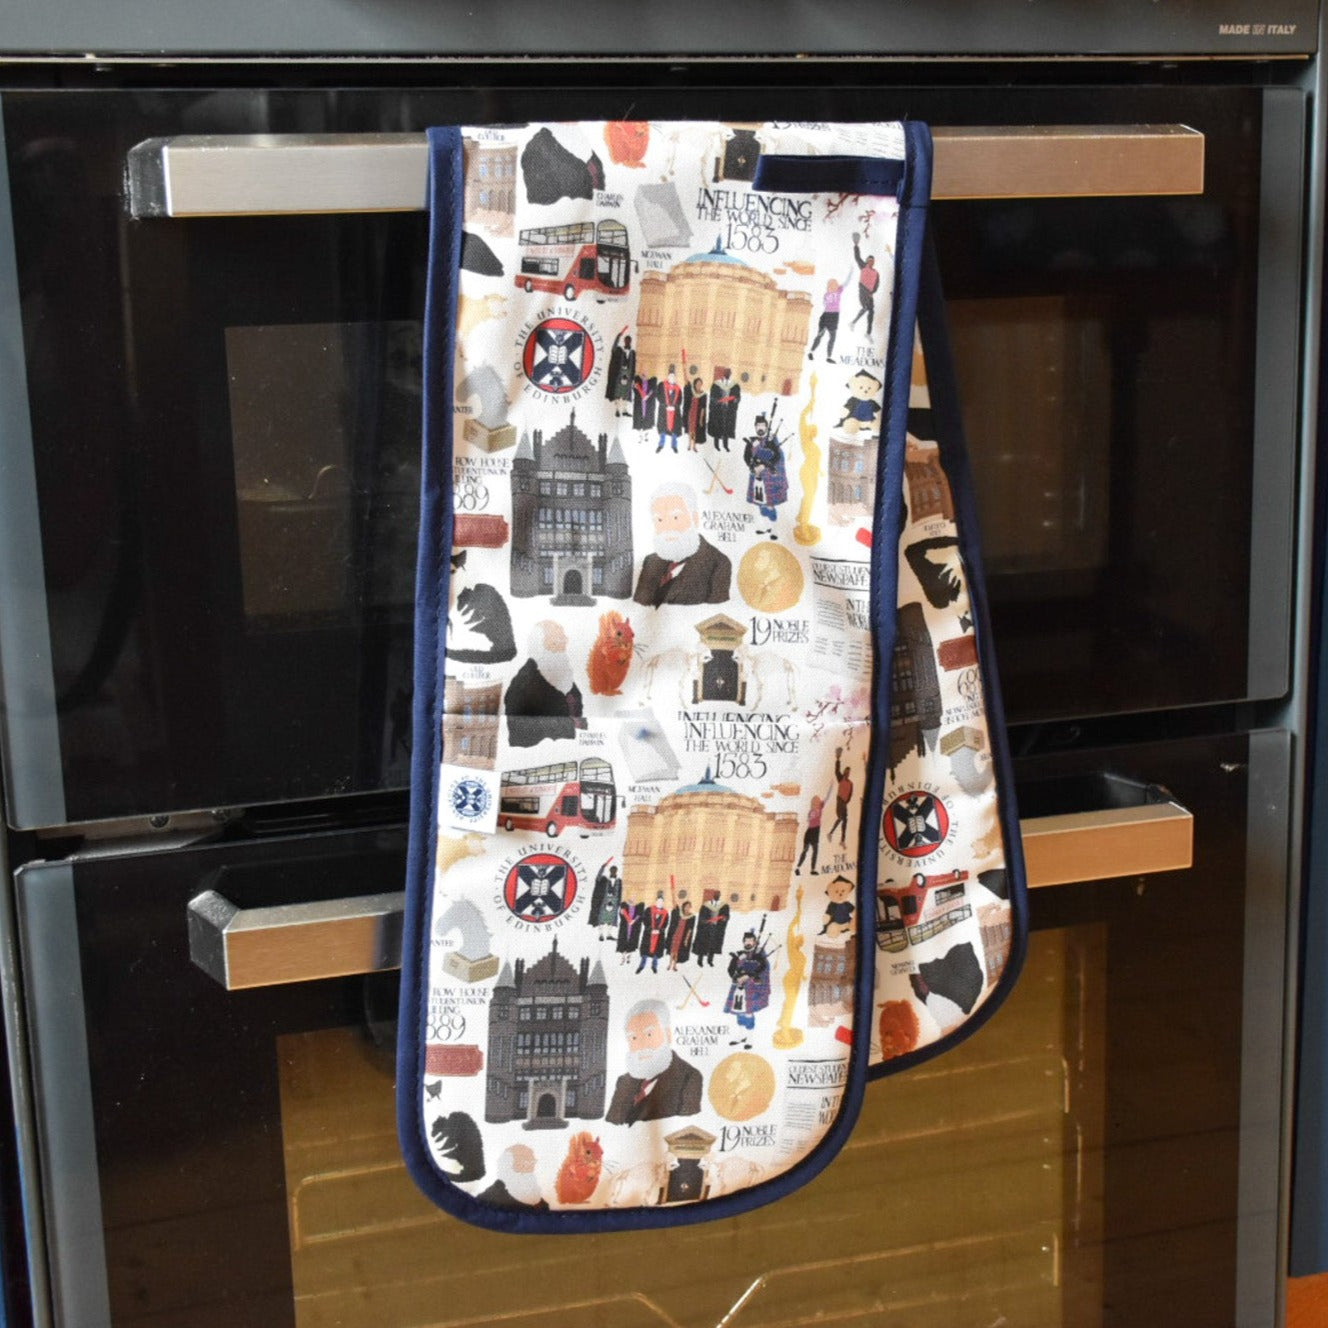 Oven gloves with illustrations of various University of Edinburgh icons, buildings, and figures, pictured with oven.